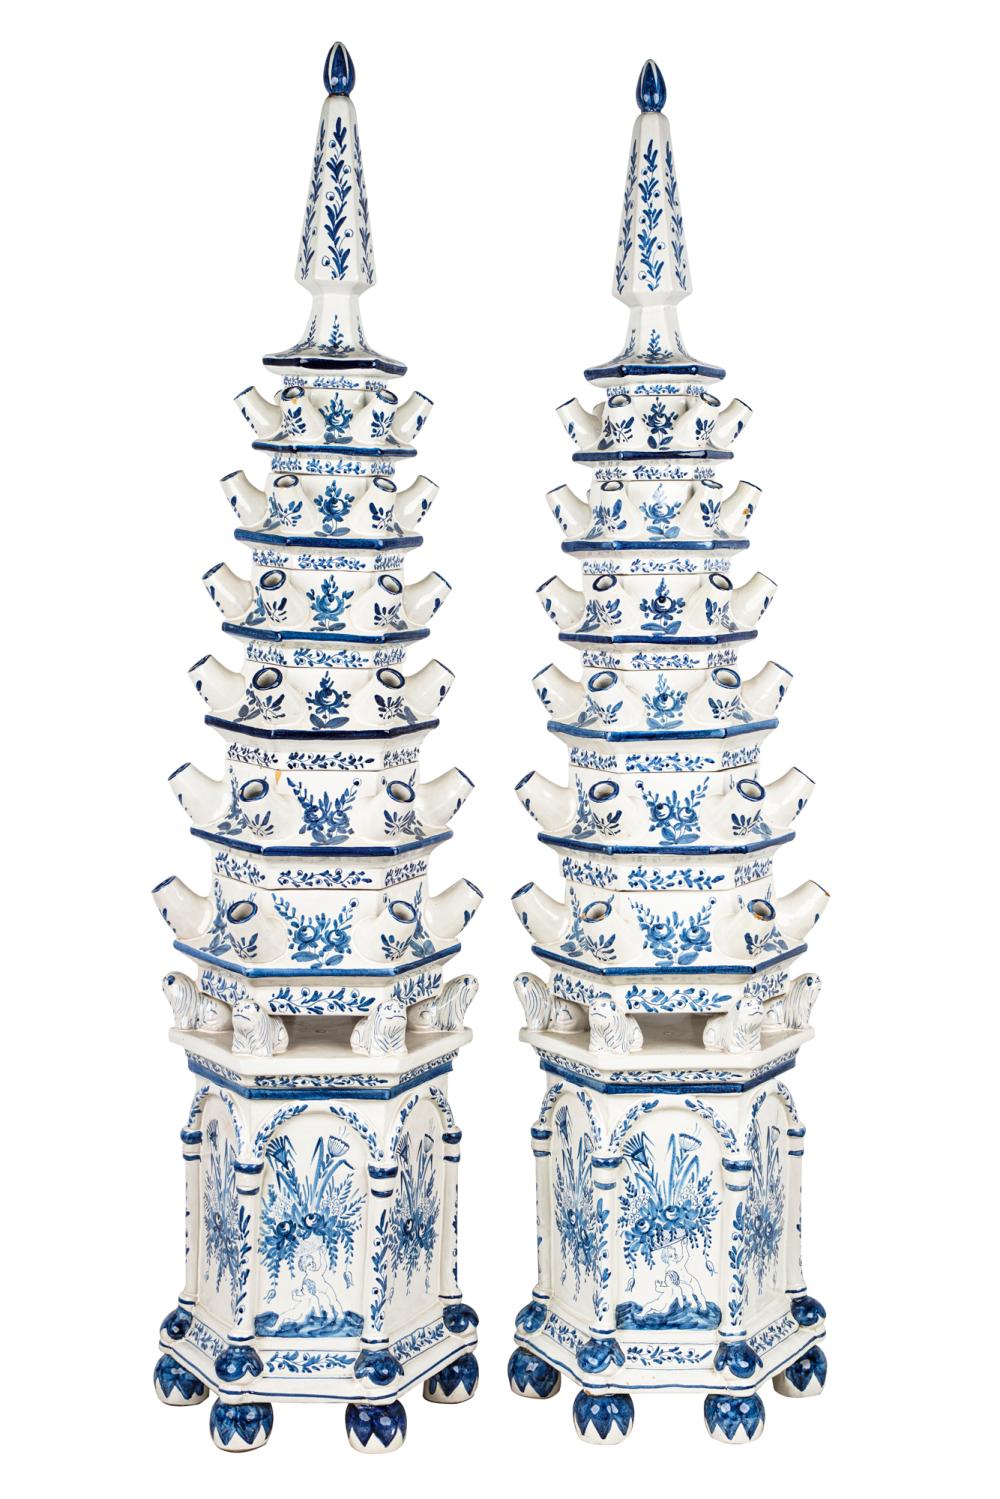 PAIR OF DELFT STYLE FAIENCE TULIPIERES20th 336cd4